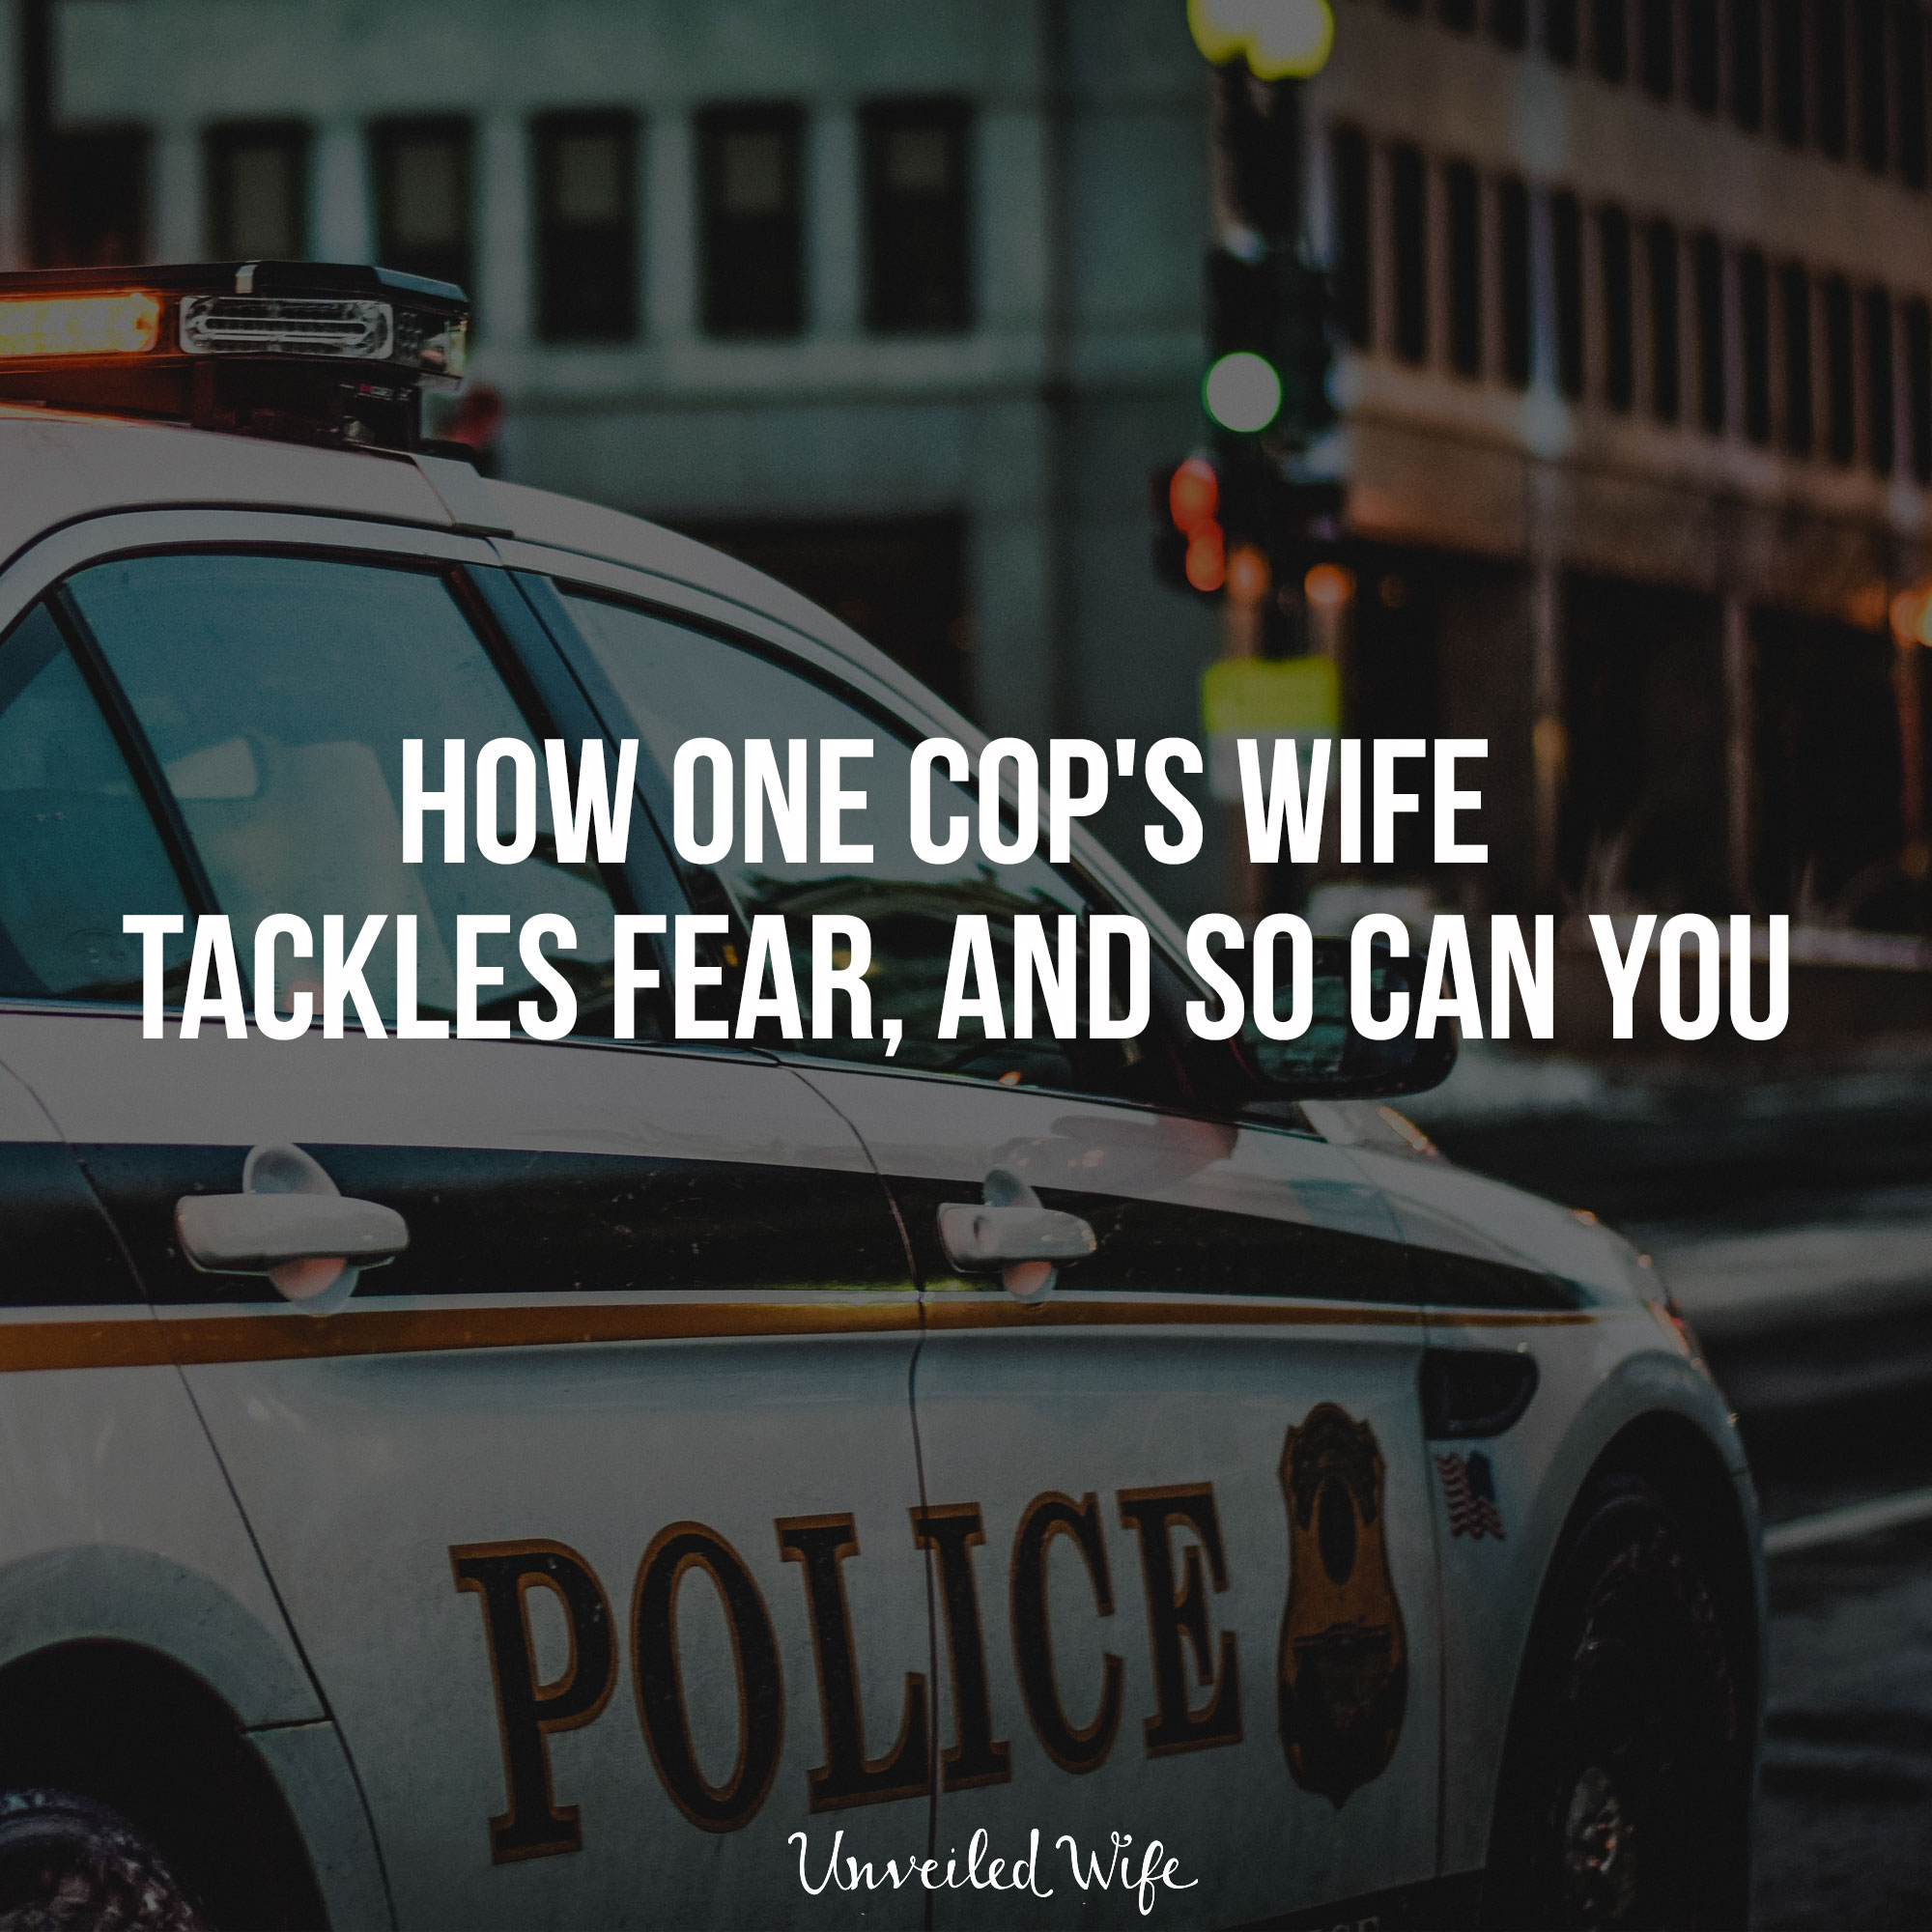 How One Cop’s Wife Tackles Fear, and So Can You